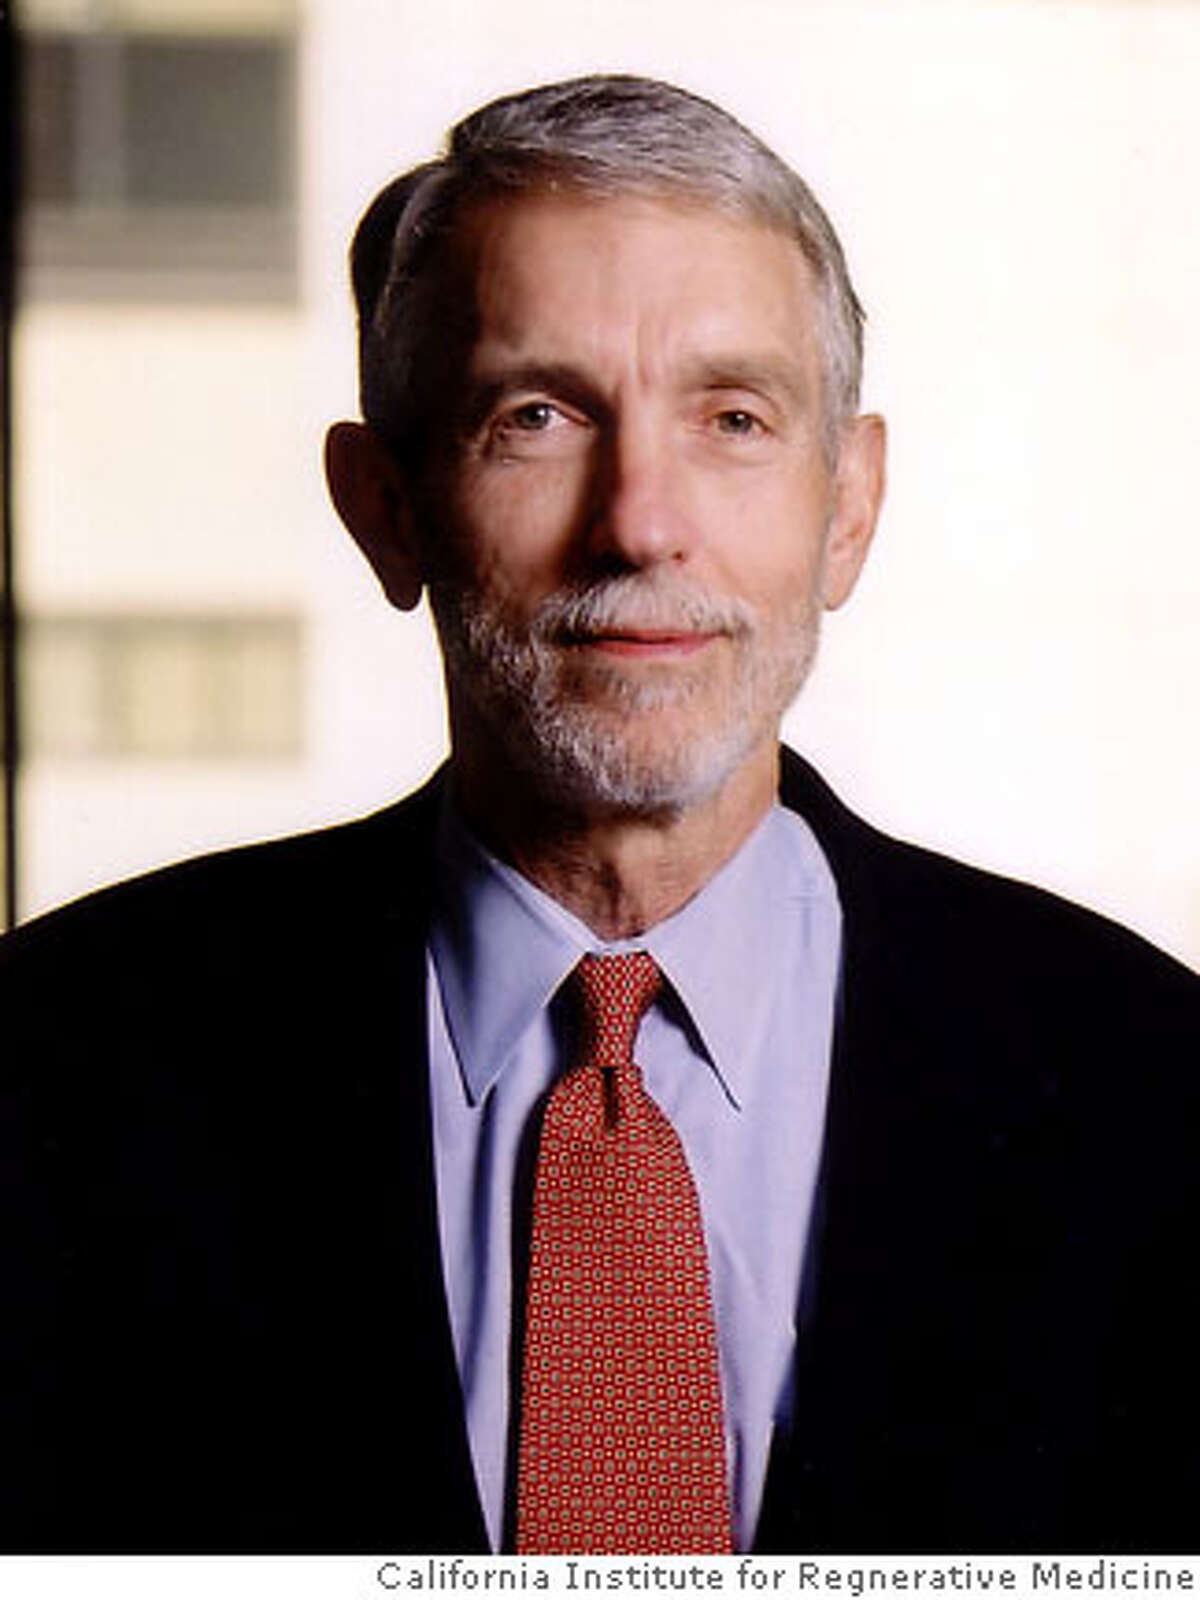 ZACH HALL.JPG Zach W. Hall, soon to be annuonced as interim president of the Prop 71 stem cell agency, known as the California Institute for Regnerative Medicine. / HO Ran on: 03-01-2005 Zach Hall once worked as an administrator and faculty member at UCSF. Ran on: 03-01-2005 Zach Hall once worked as an administrator and faculty member at UCSF. Ran on: 05-08-2005 Zach Hall Ran on: 05-08-2005 Zach Hall Ran on: 12-08-2006 Zach W. Hall